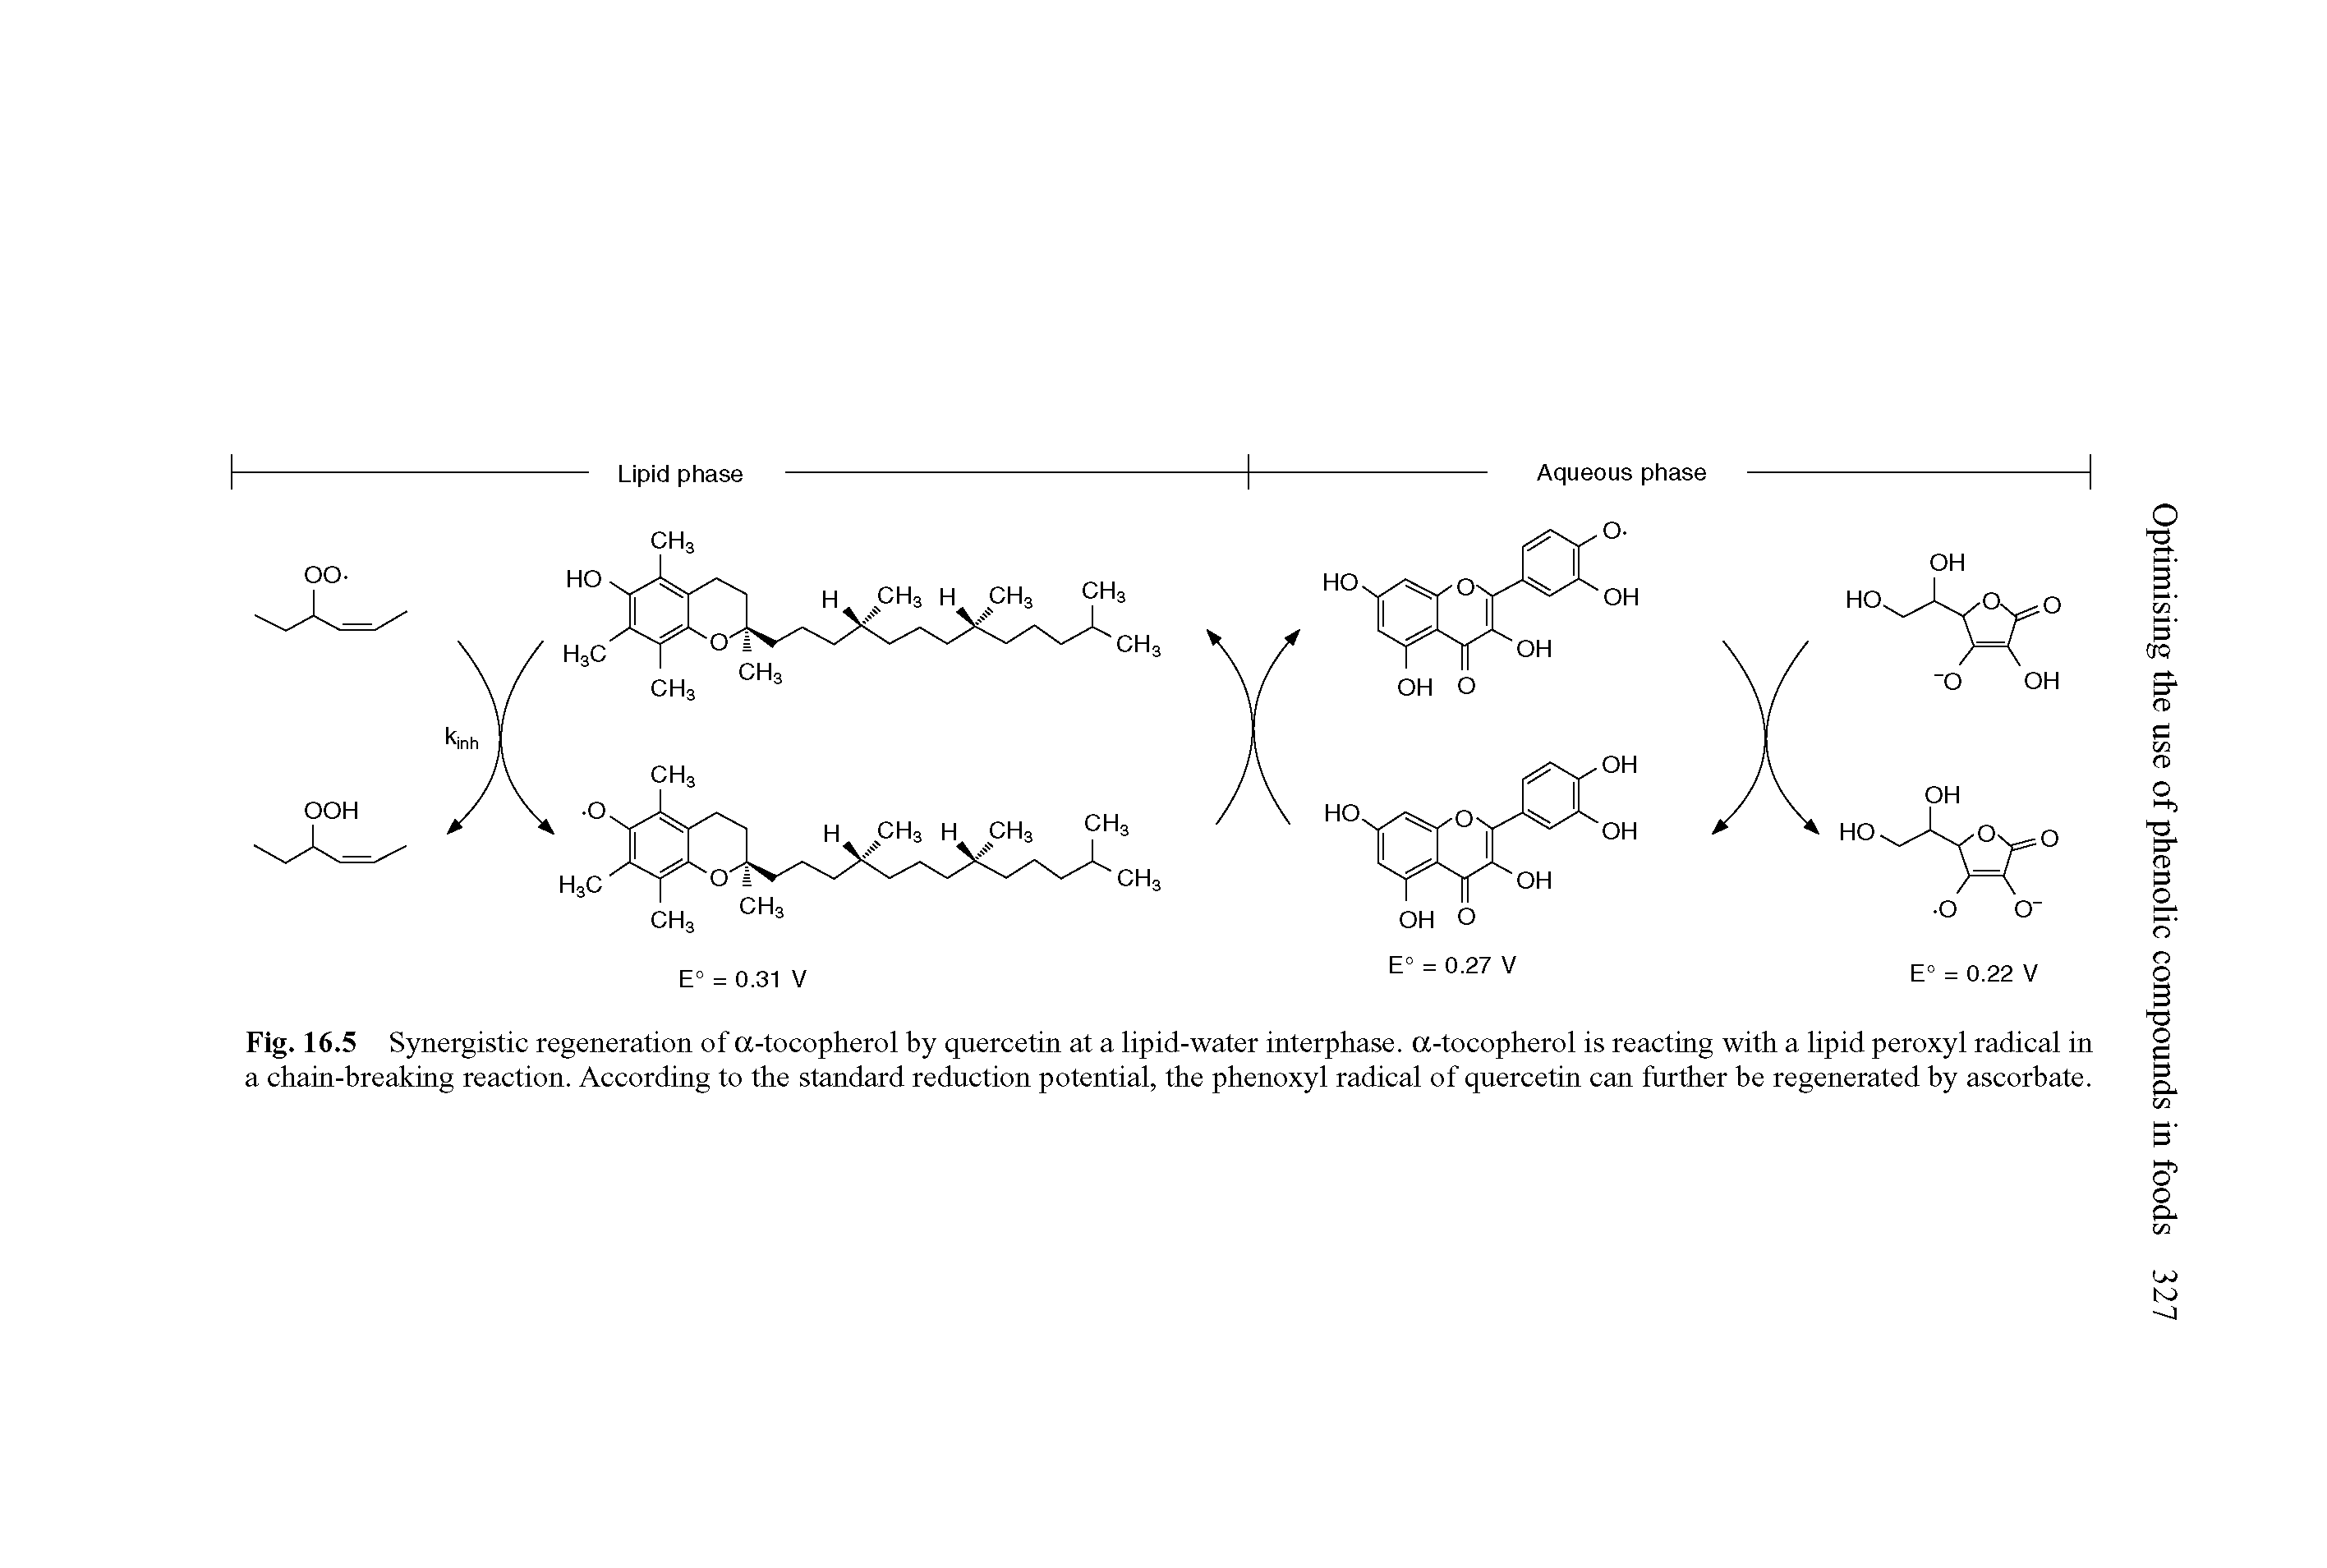 Fig. 16.5 Synergistic regeneration of a-tocopherol by quercetin at a lipid-water interphase. a-tocopherol is reacting with a lipid peroxyl radical in a chain-breaking reaction. According to the standard reduction potential, the phenoxyl radical of quercetin can further be regenerated by ascorbate.